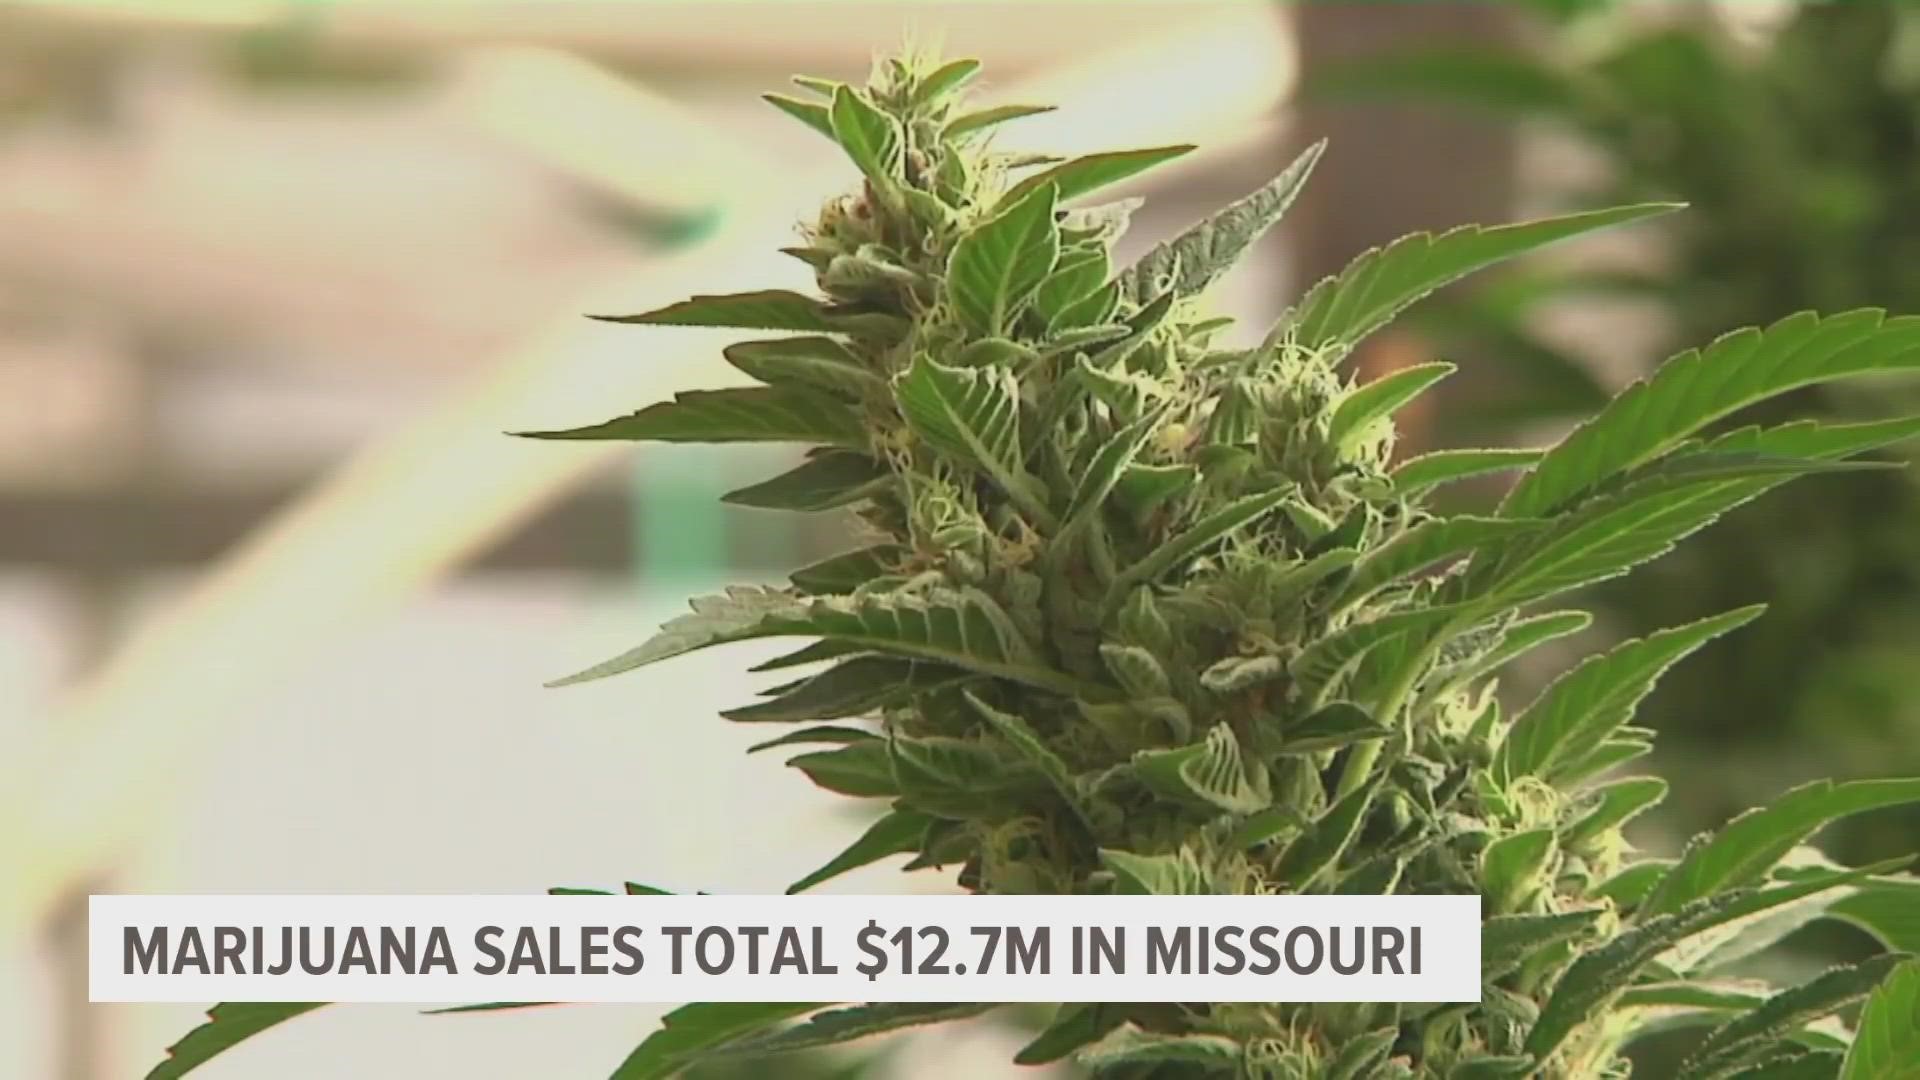 In the first weekend alone recreational sales totaled more than $8.5M and medical sales brought in another $4M, according to MDHSS.